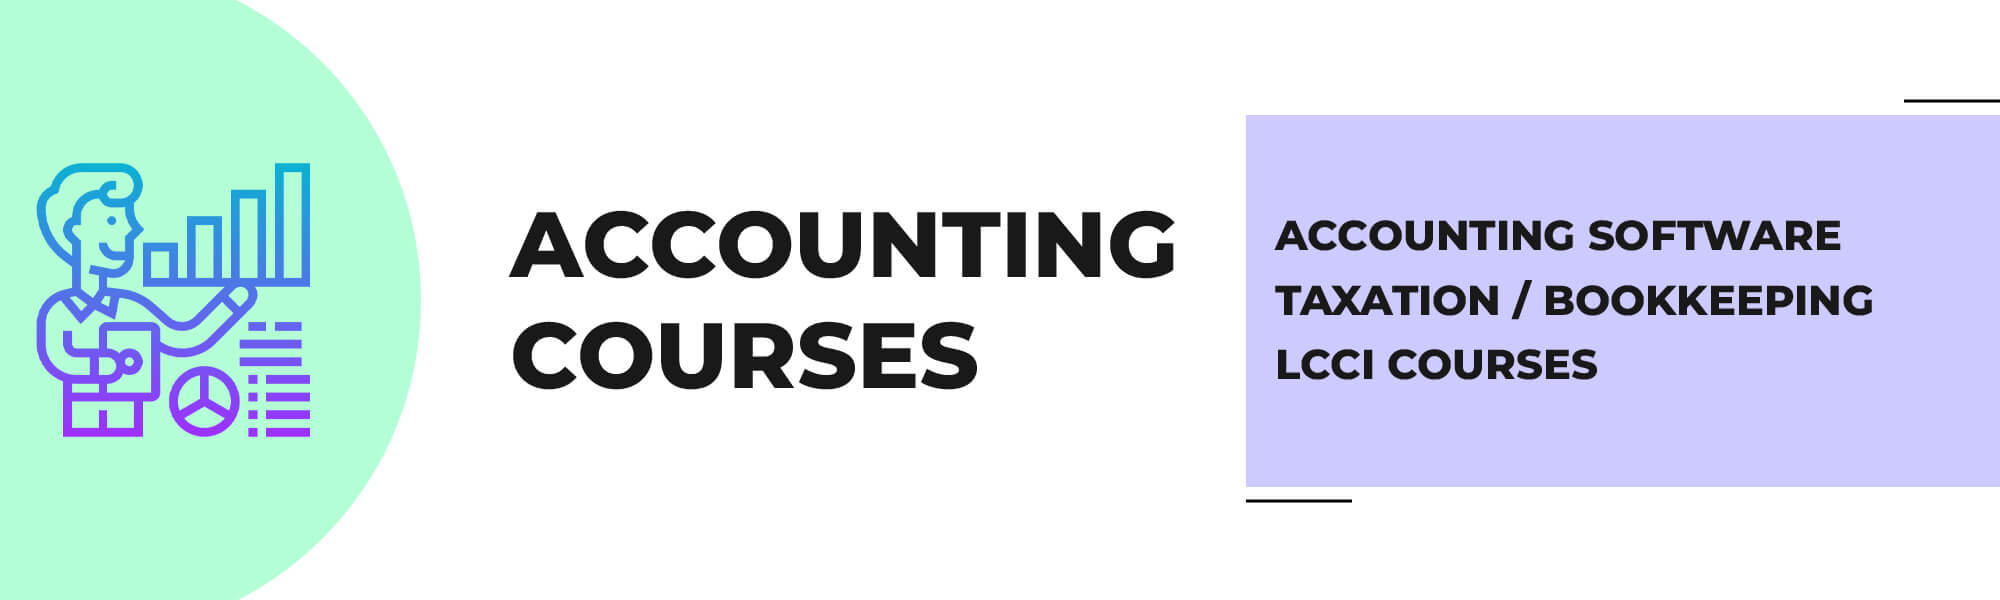 Accounting and Finance Training Course in Singapore